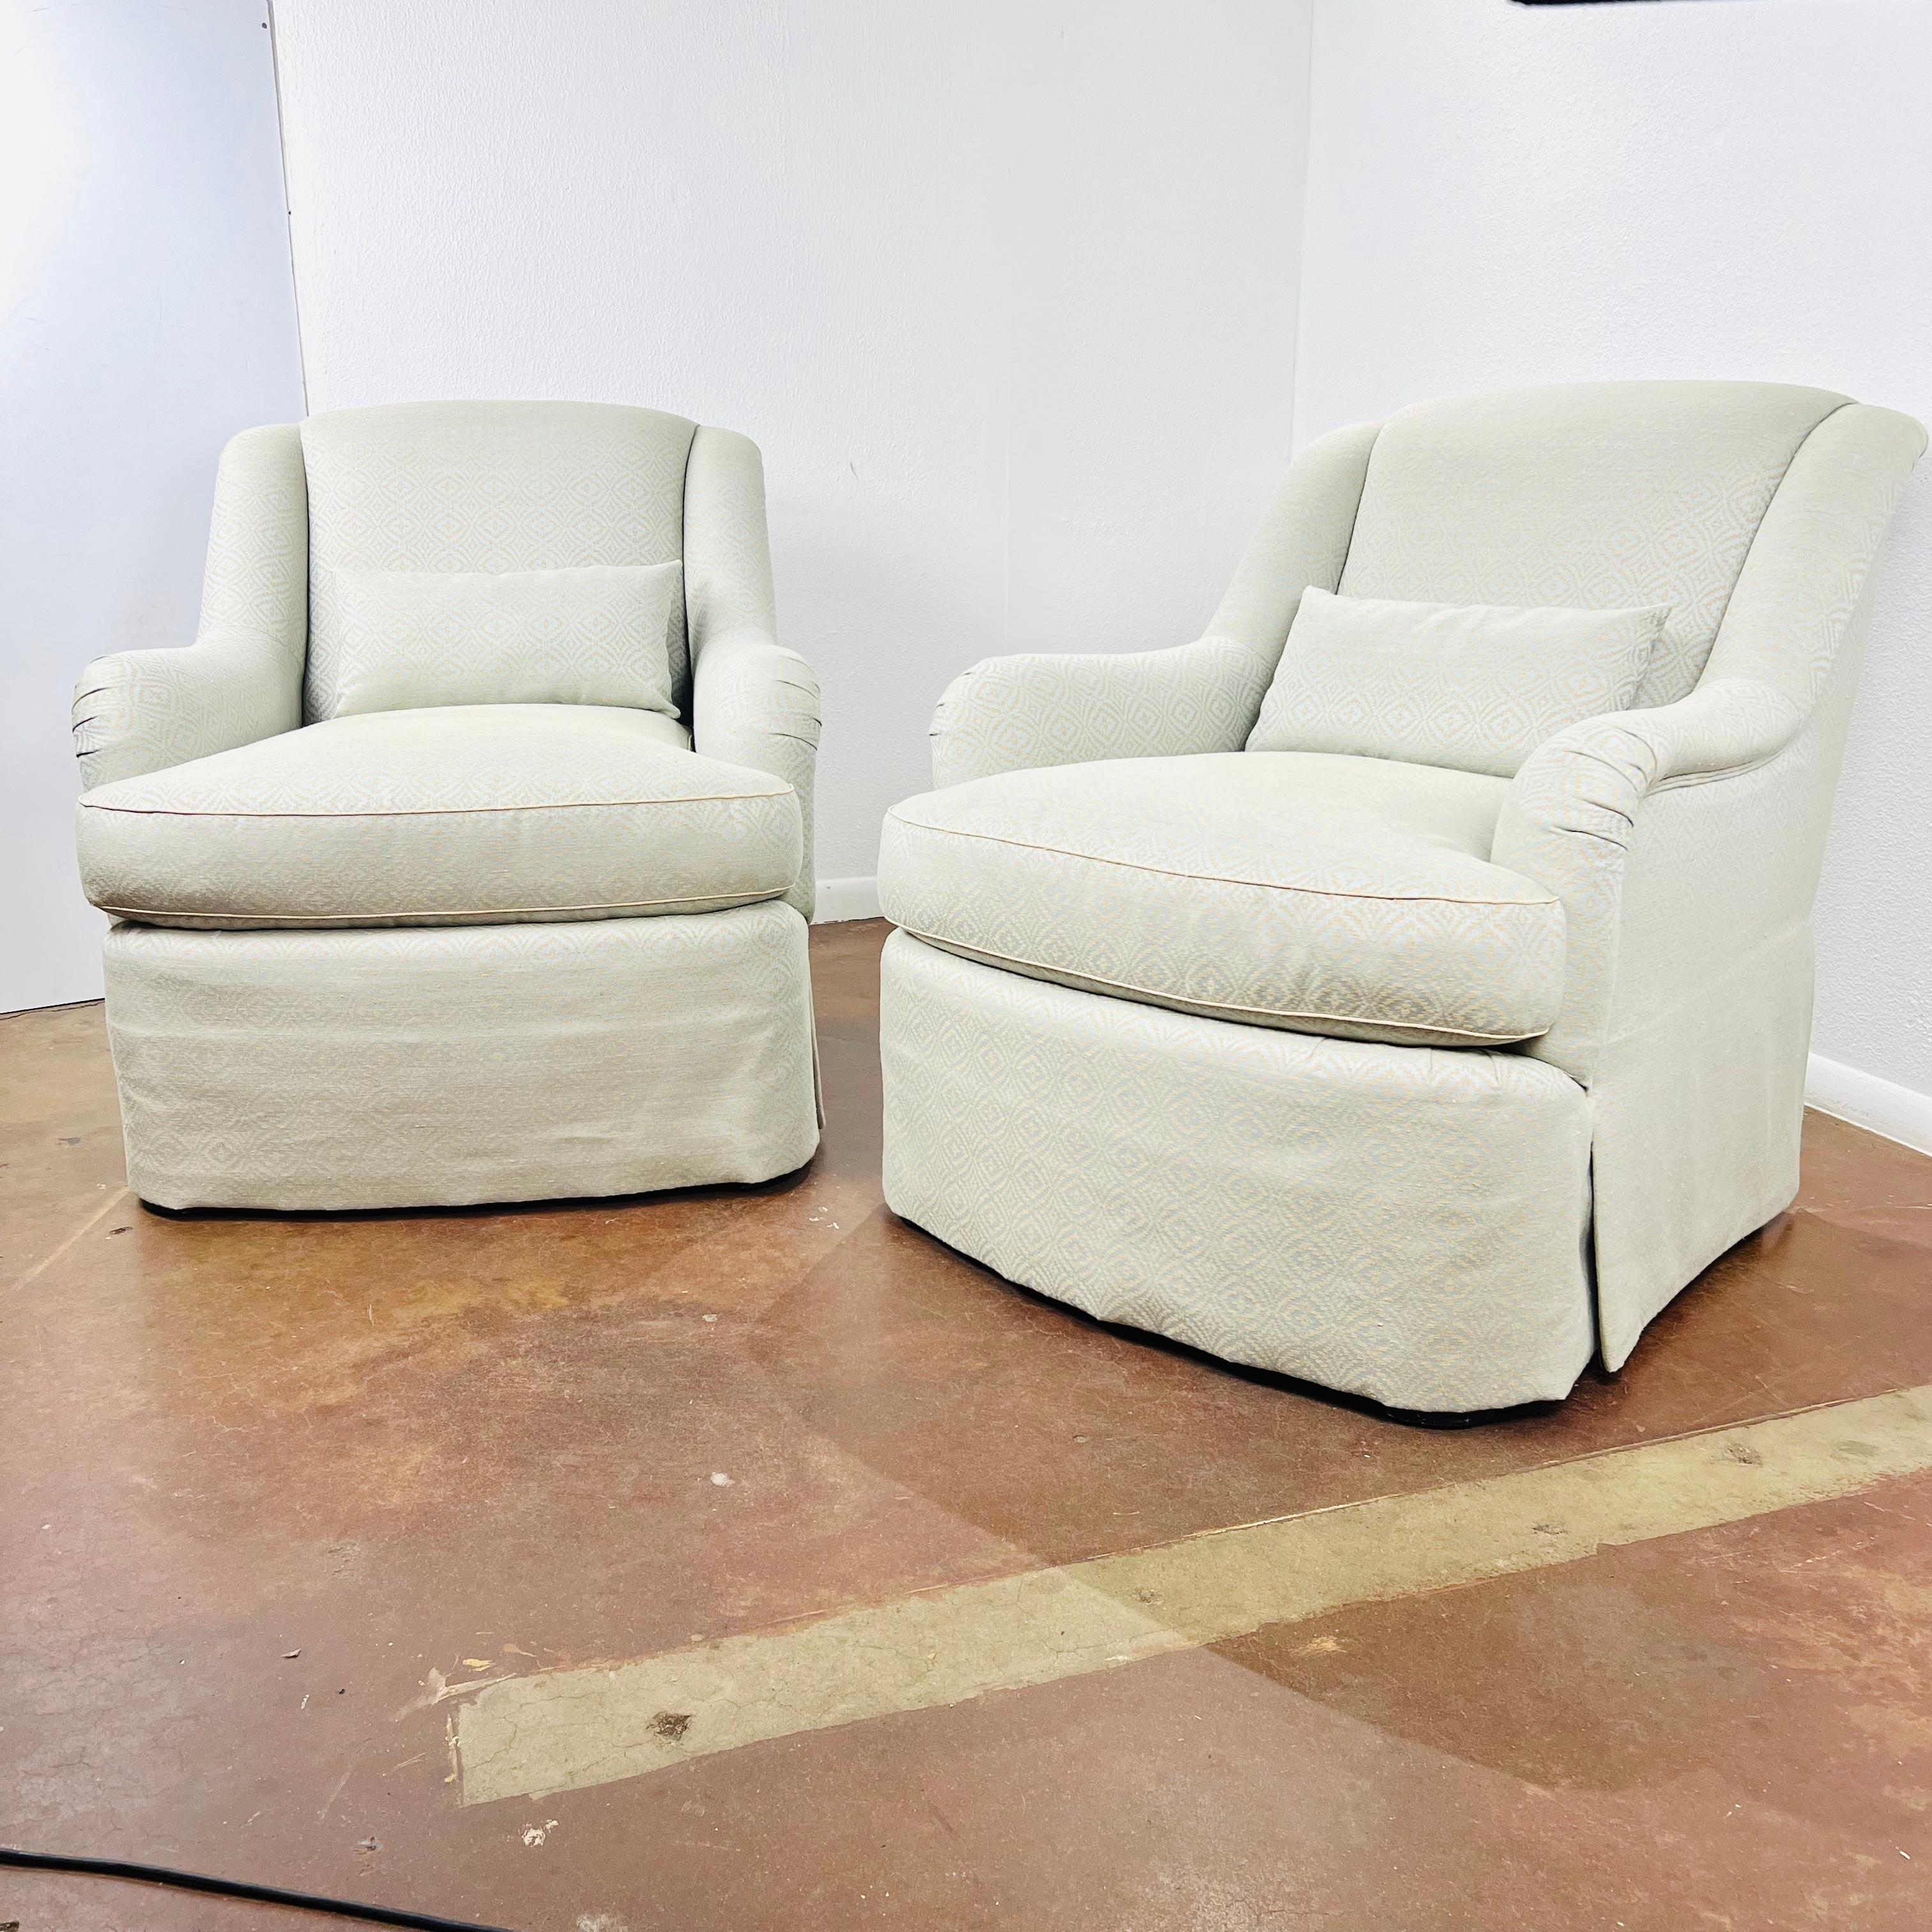 This elegant pair of English-arm club chairs features down wrapped T seat cushions and rests on tapered legs under a waterfall skirt. Upholstered in Lee Jofa fabric. Excellent condition with no rips, tears, or stains and very minimal signs of